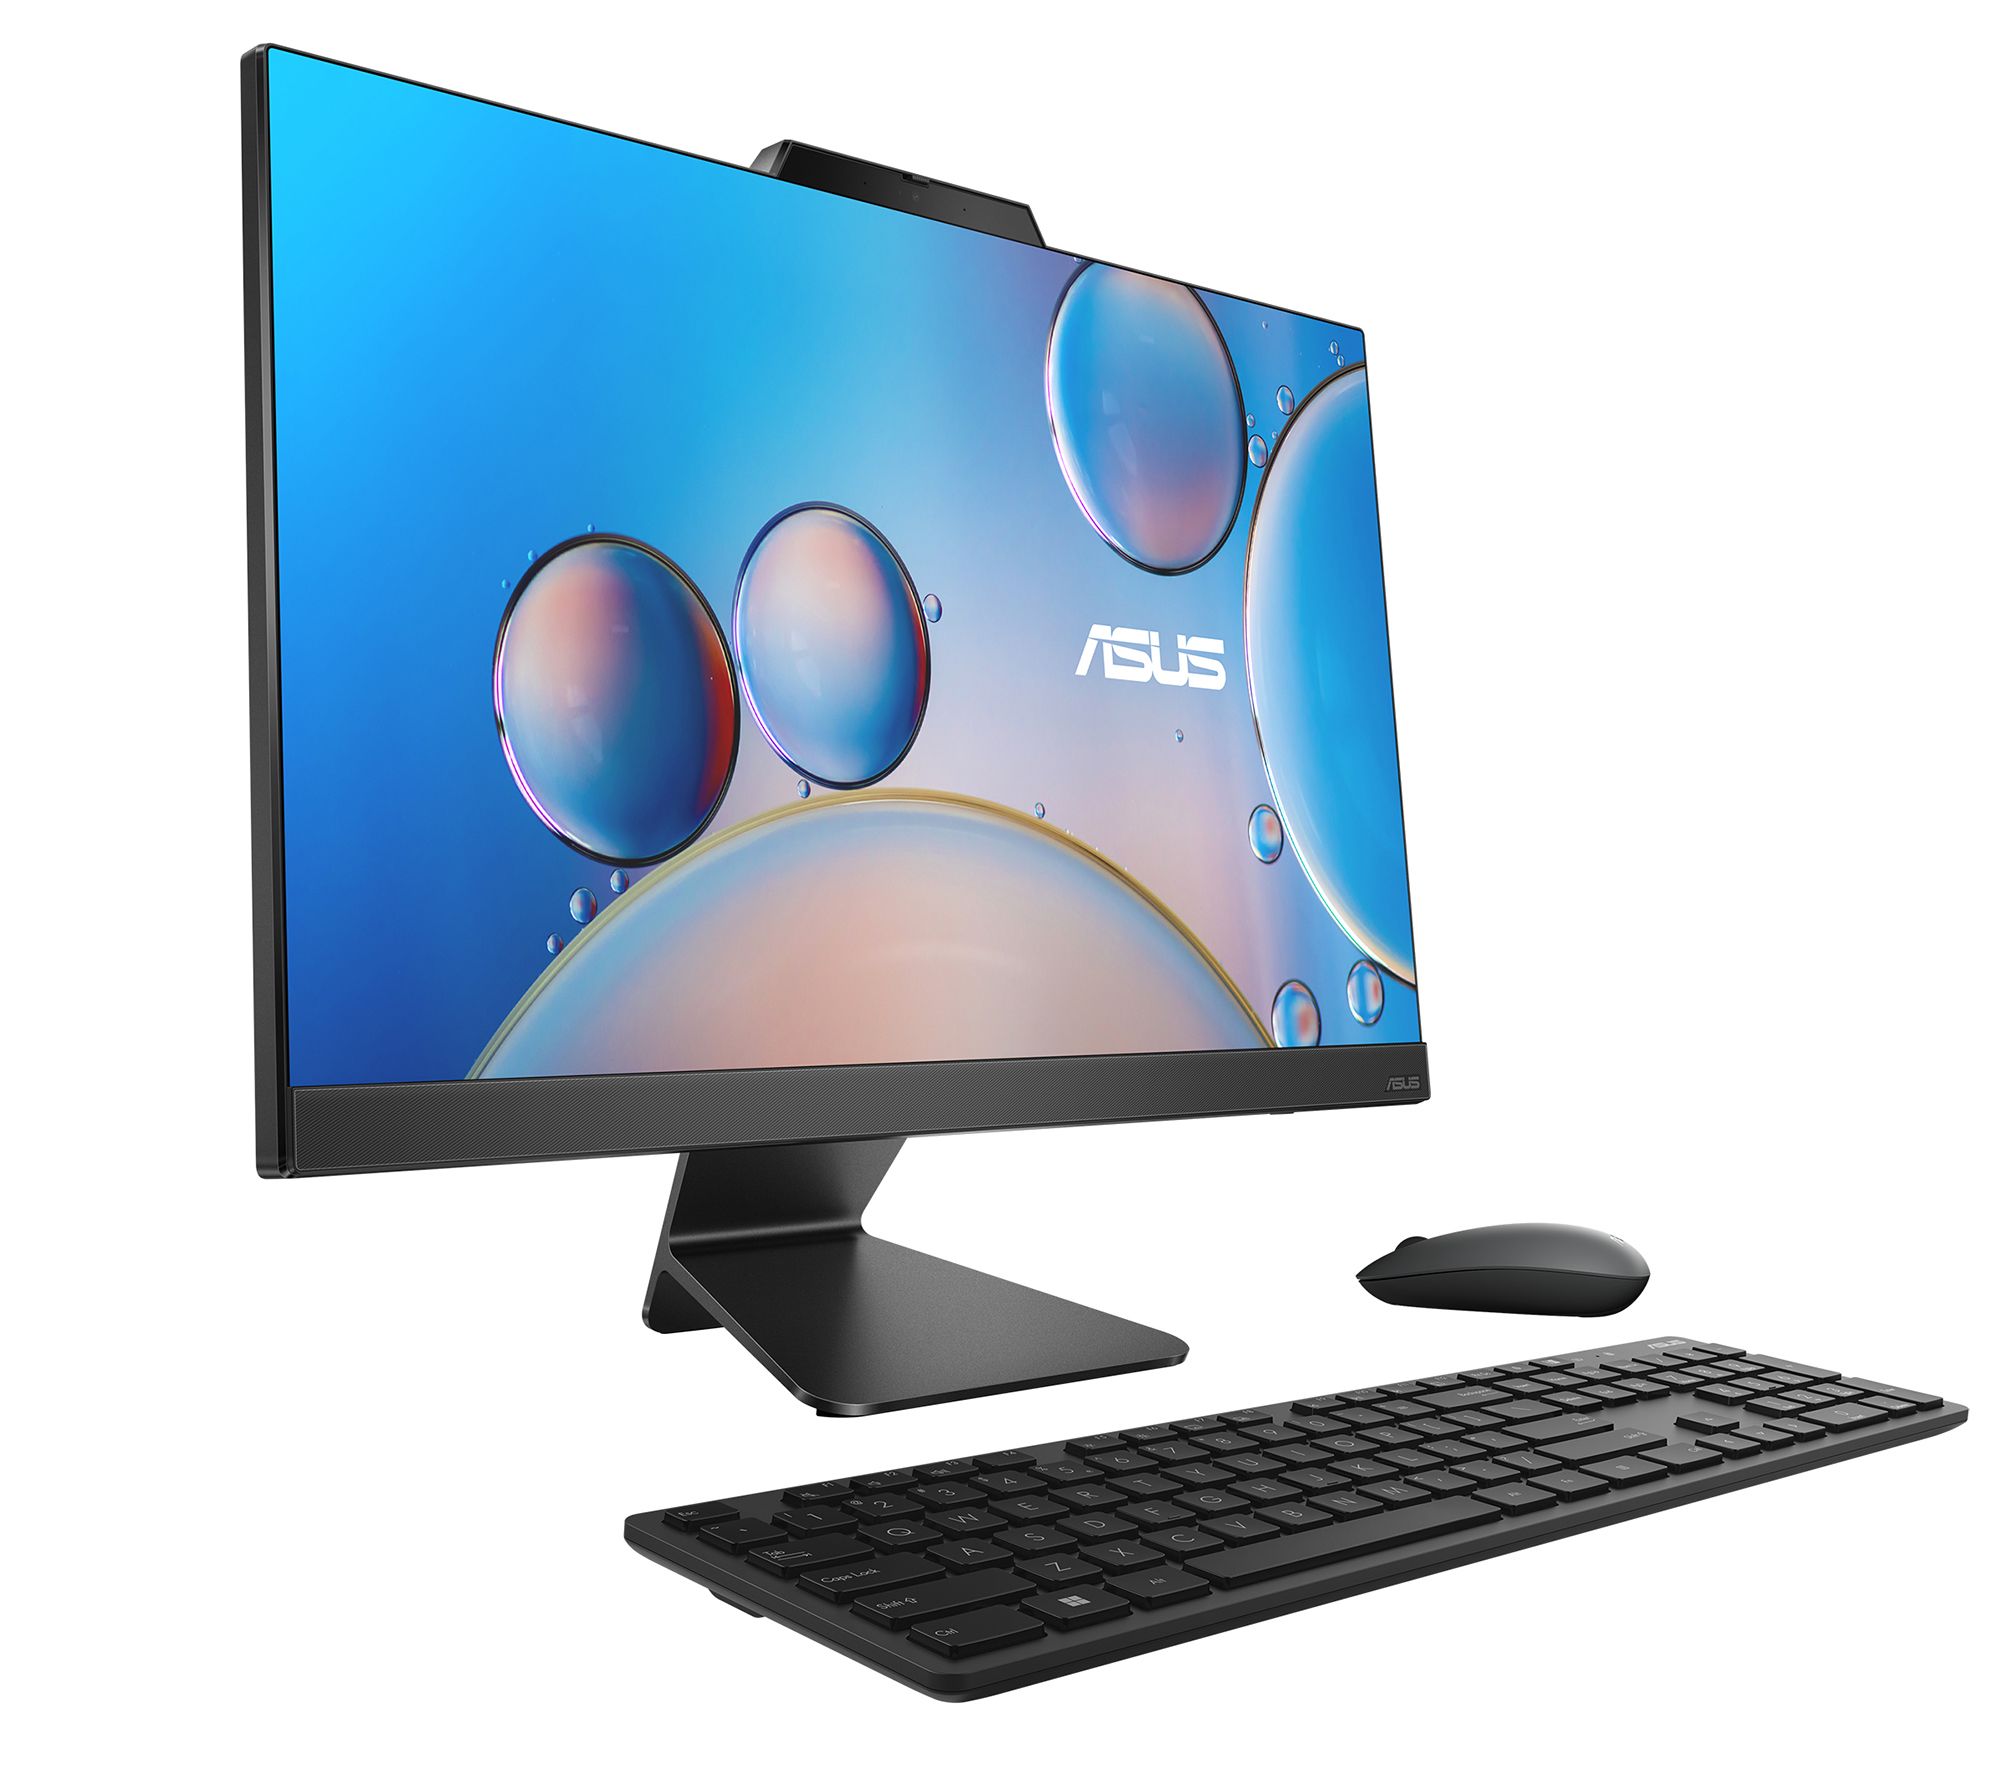 Asus M3402 all-in-one PC review: Is this your next home computer?